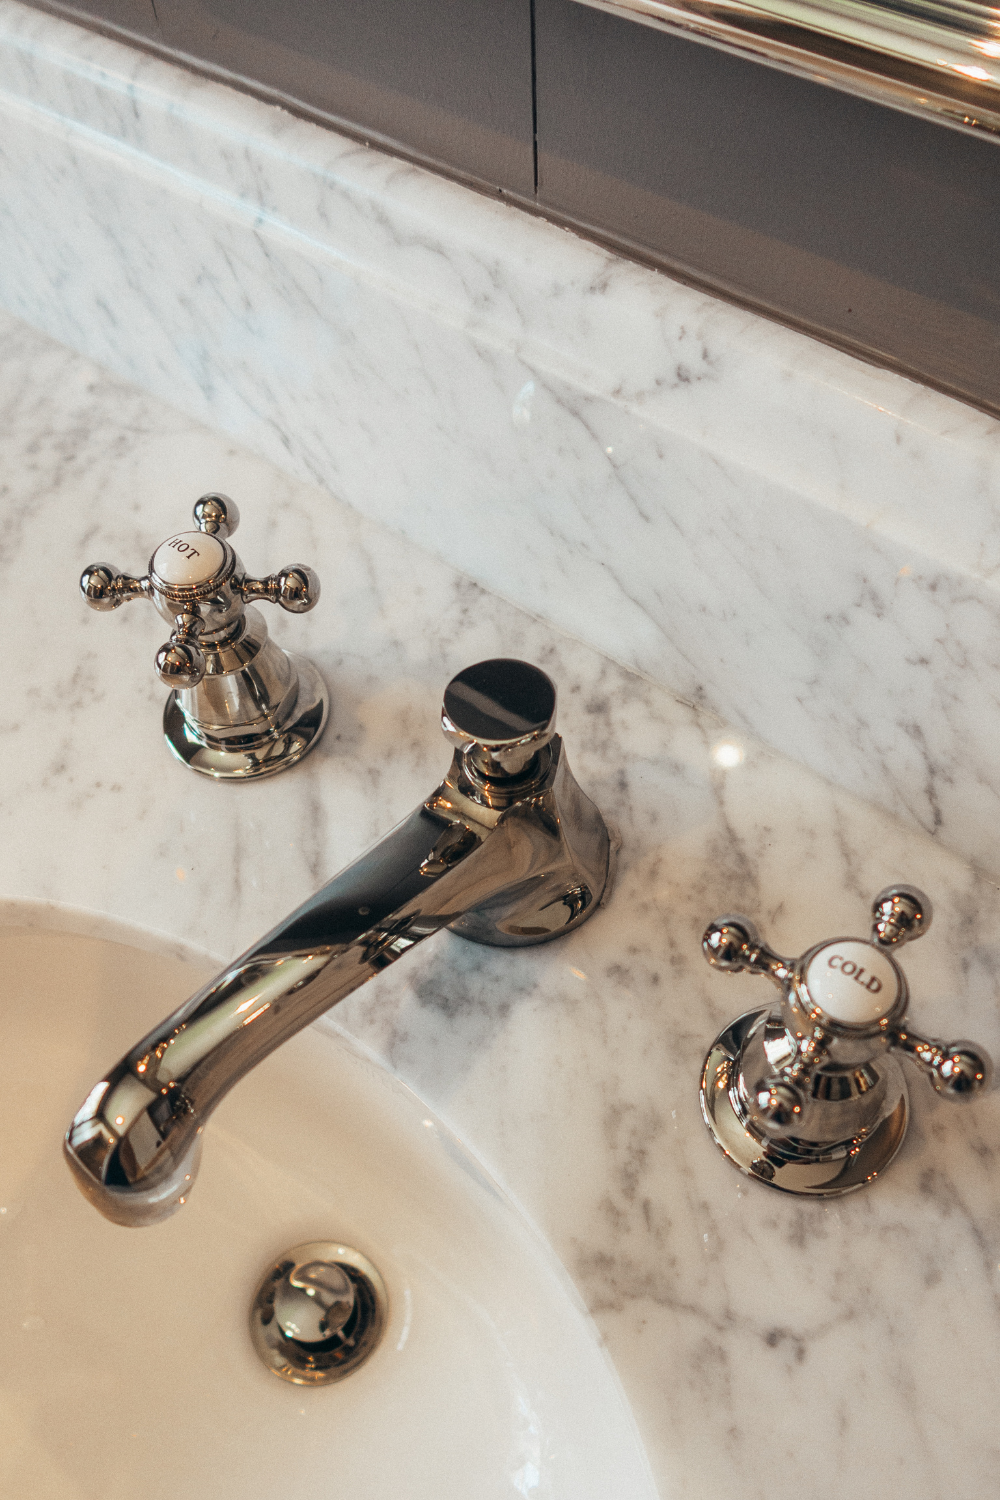 timeless bathroom, cottage core, brown bathroom, bathroom remodel ideas, Sophisticated bathroom retreat with timeless finishes and lighting, interior designer houston, interior design, Elegant Carrara marble bathroom countertop with polished nickel fixtures